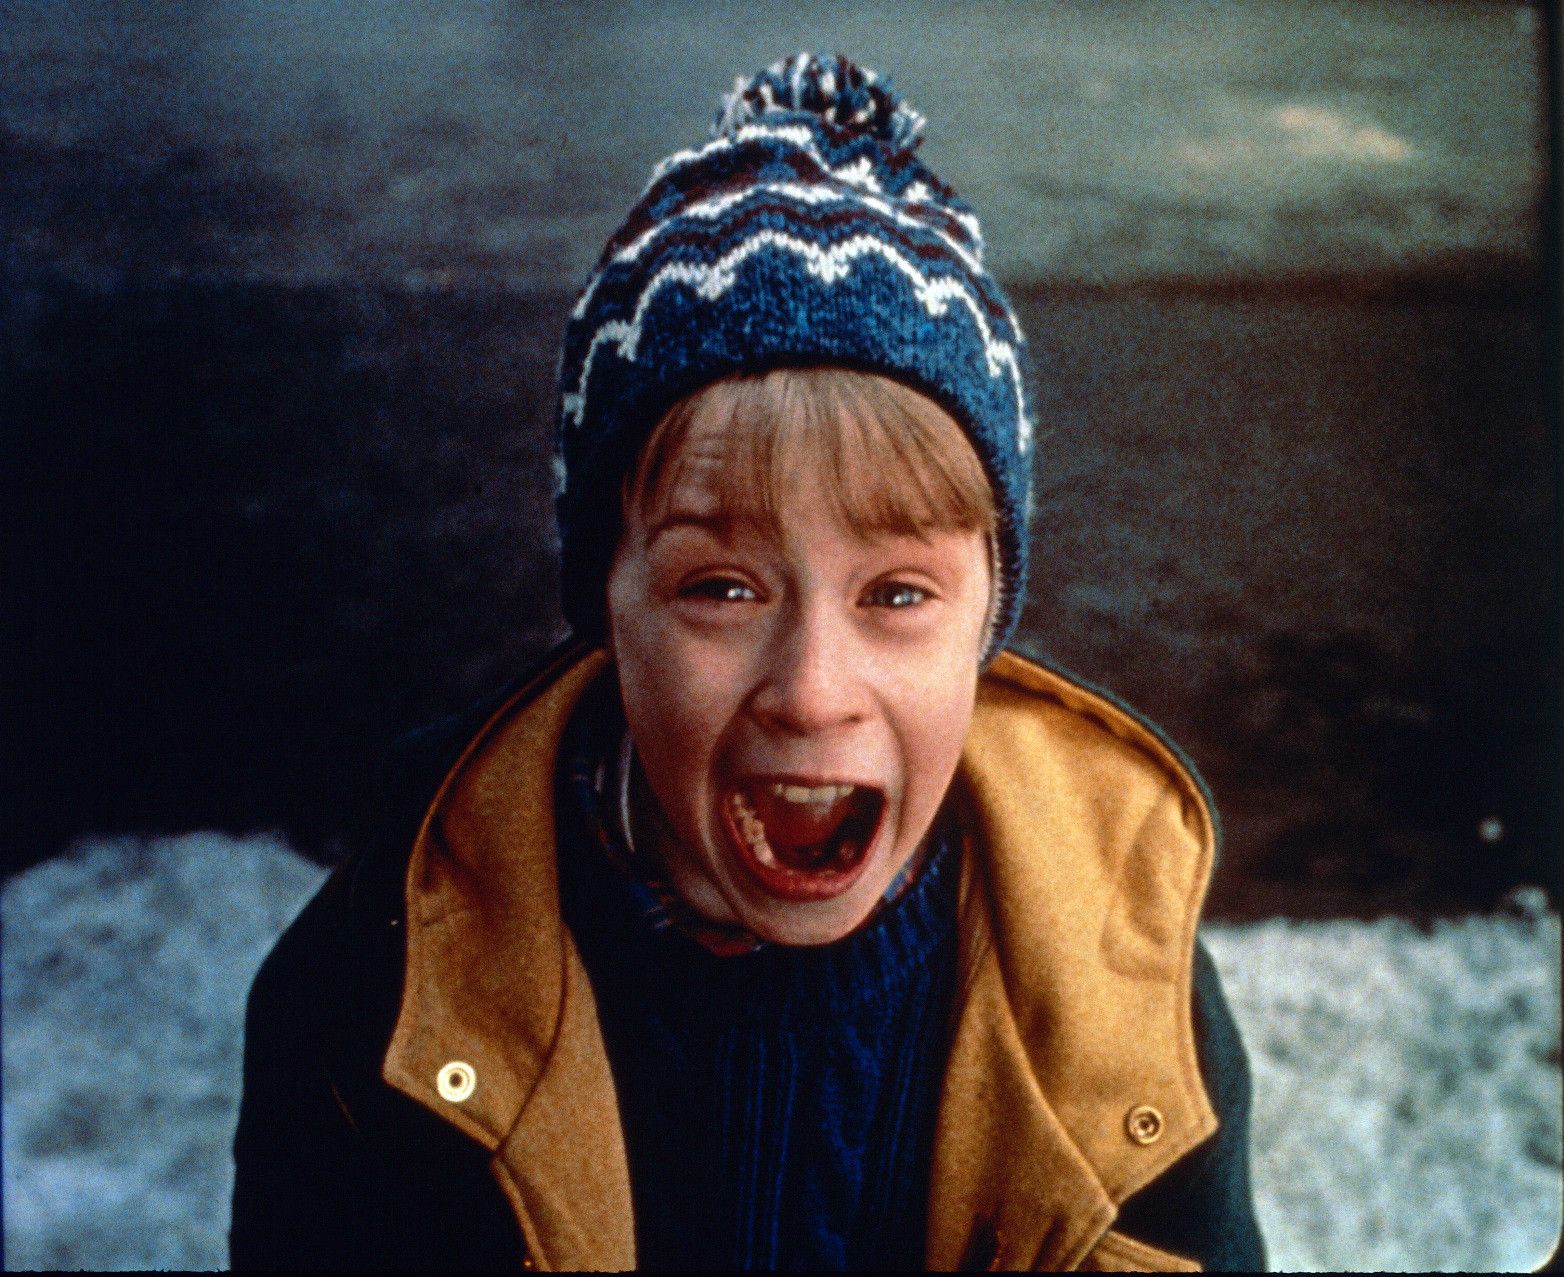 Home Alone Pictures Wallpapers